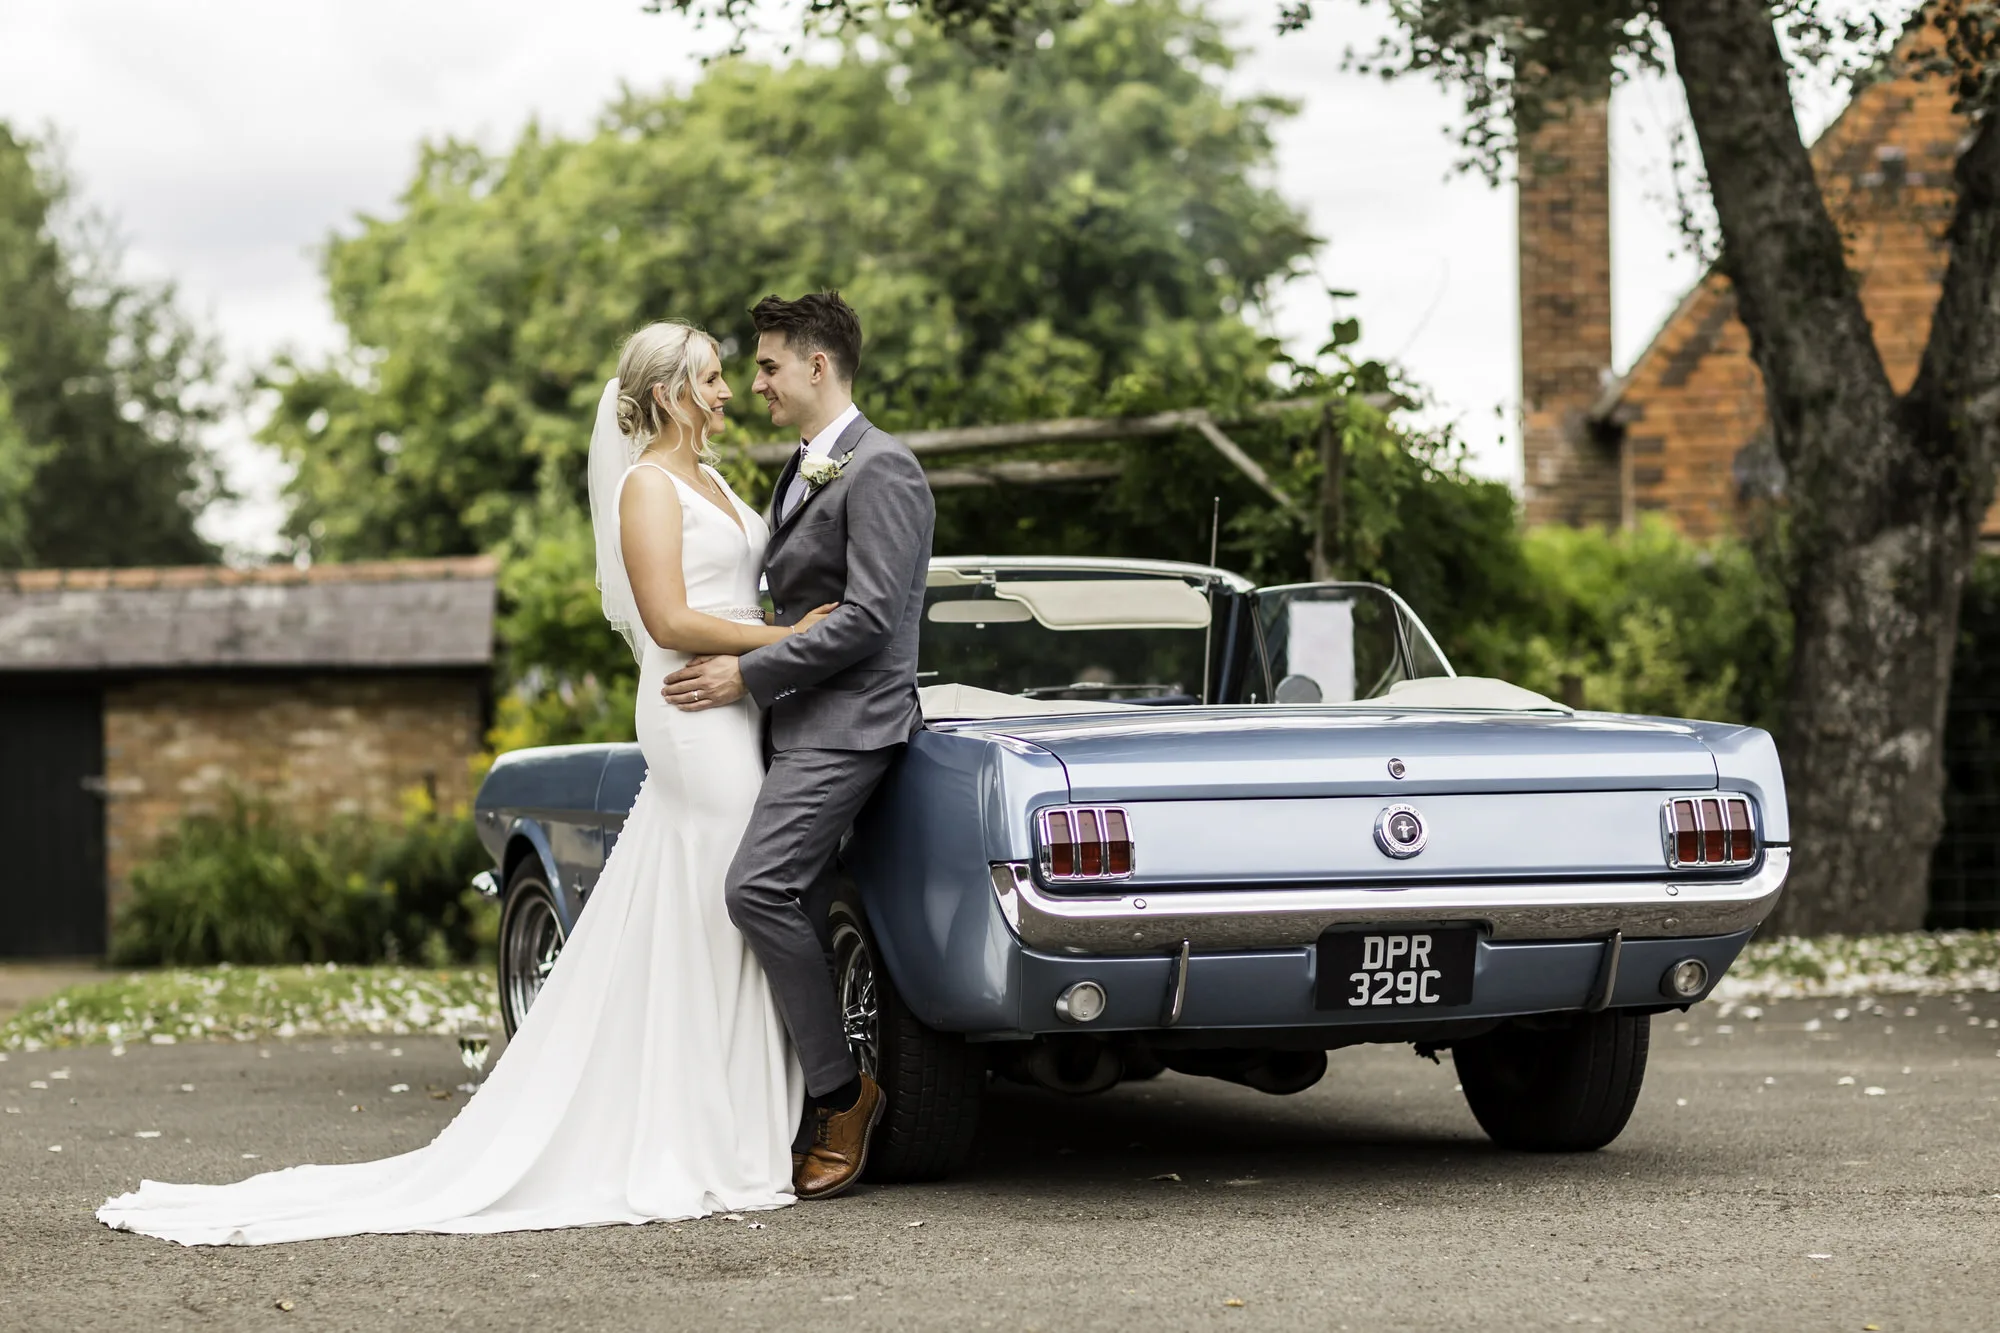 Sussex wedding photographer - bride and groom post together with blue Mustang wedding car at a pub in West Sussex